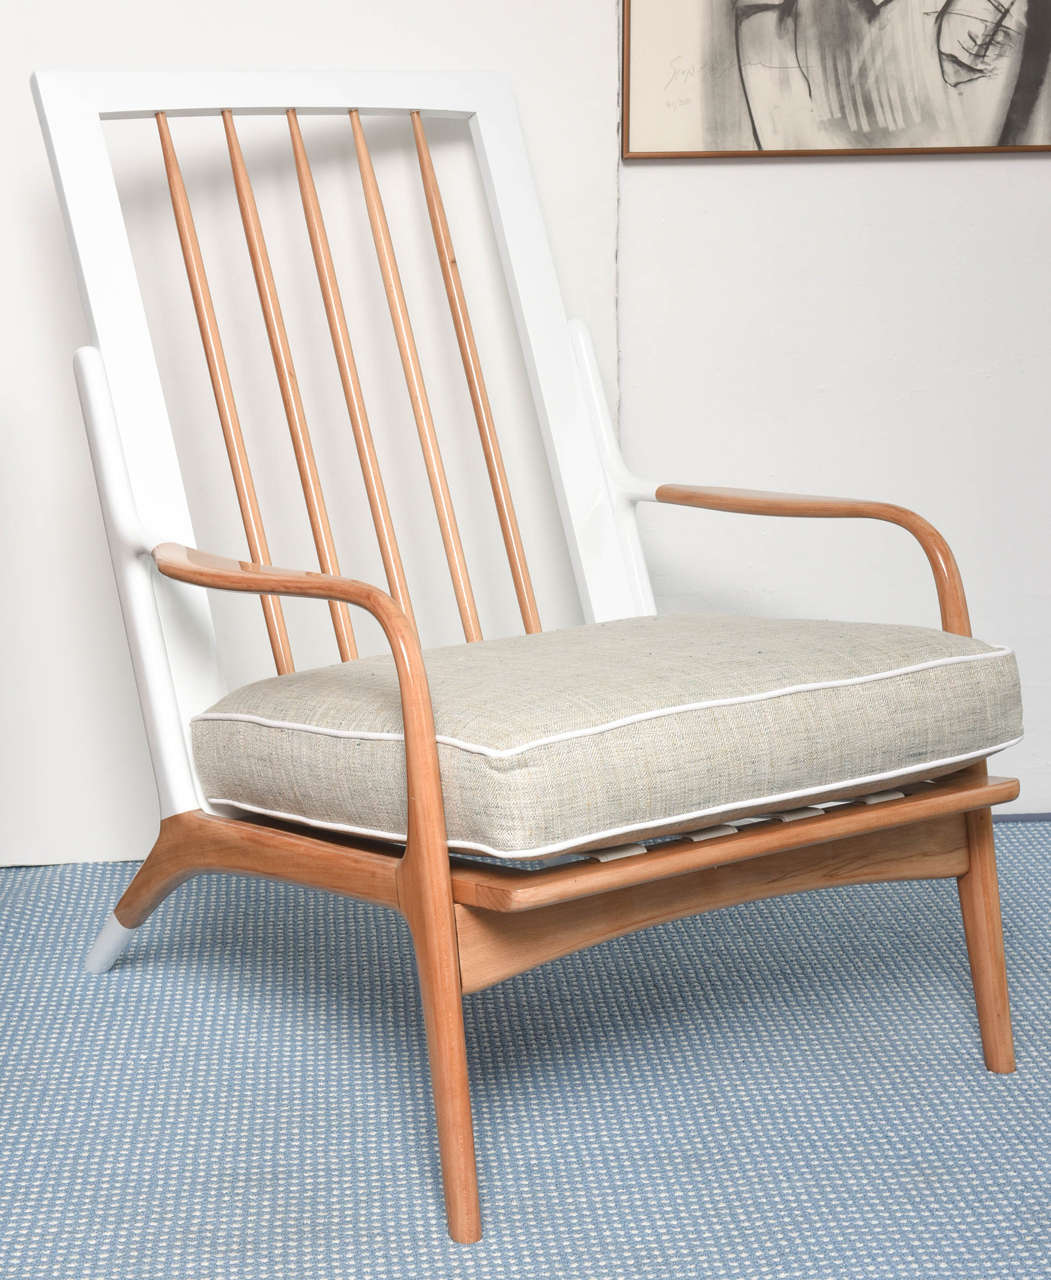 MidCentury White and Wood Lounge Chair For Sale at 1stdibs